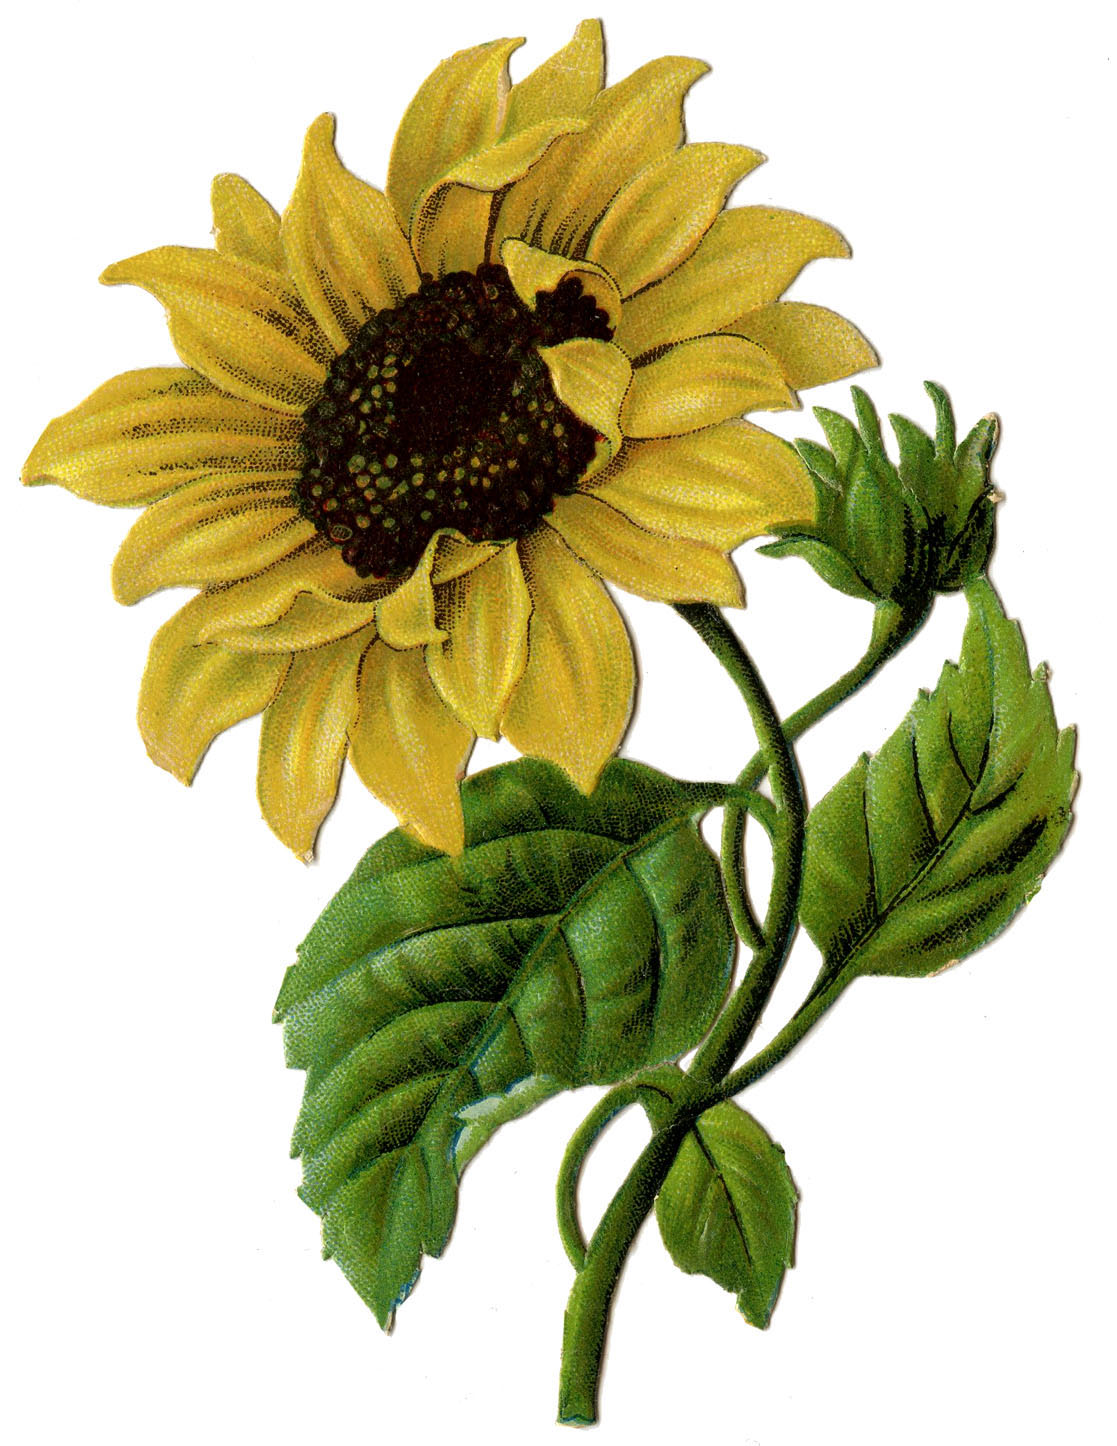 8 Sunflower Images - Beautiful! - The Graphics Fairy